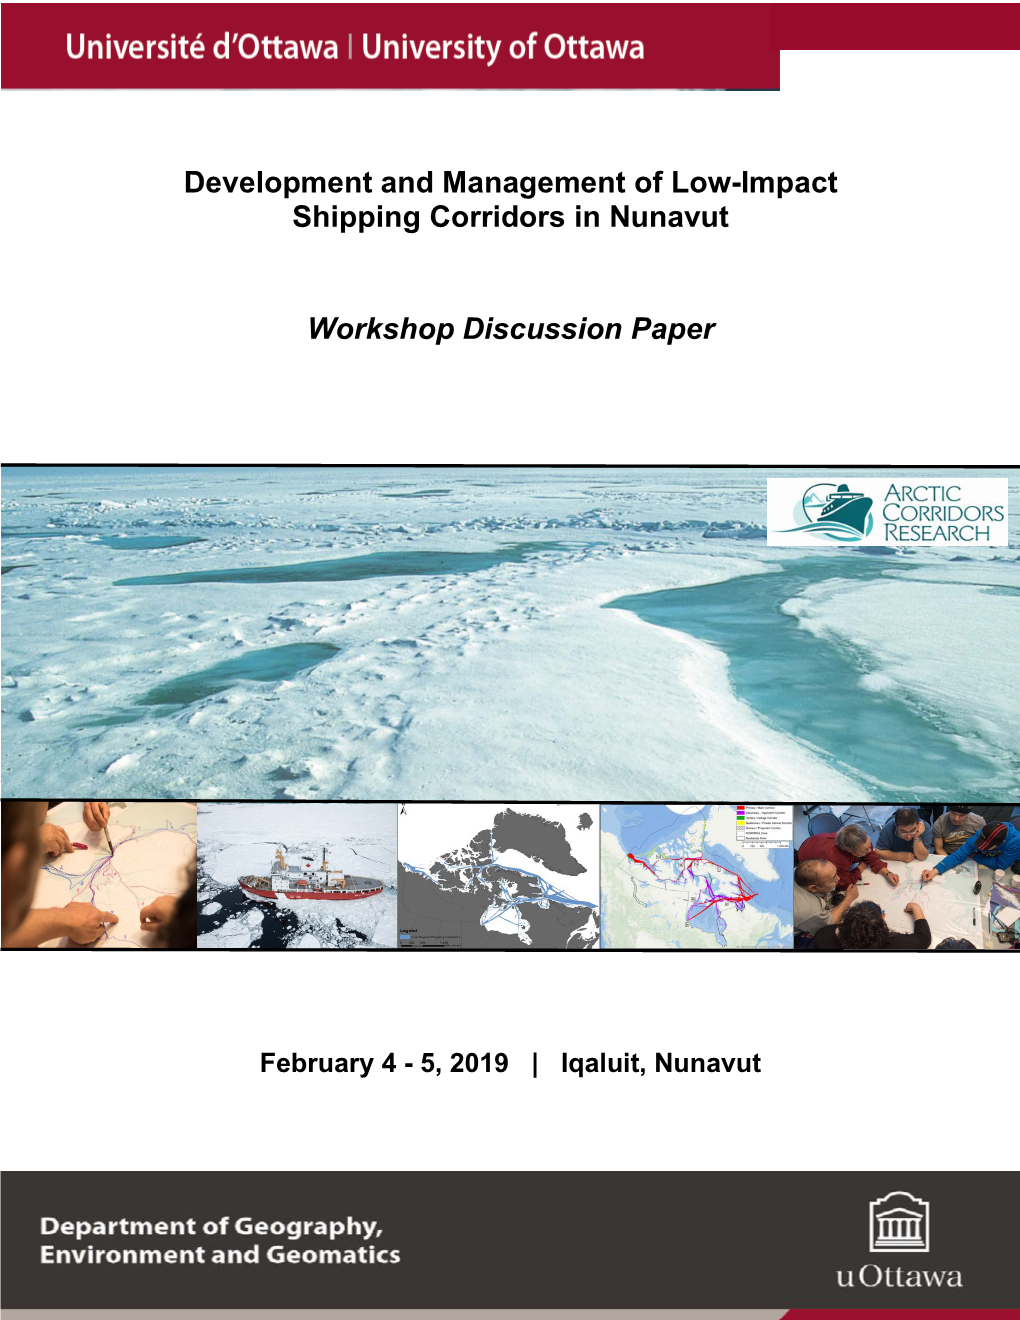 Development and Management of Low-Impact Shipping Corridors in Nunavut